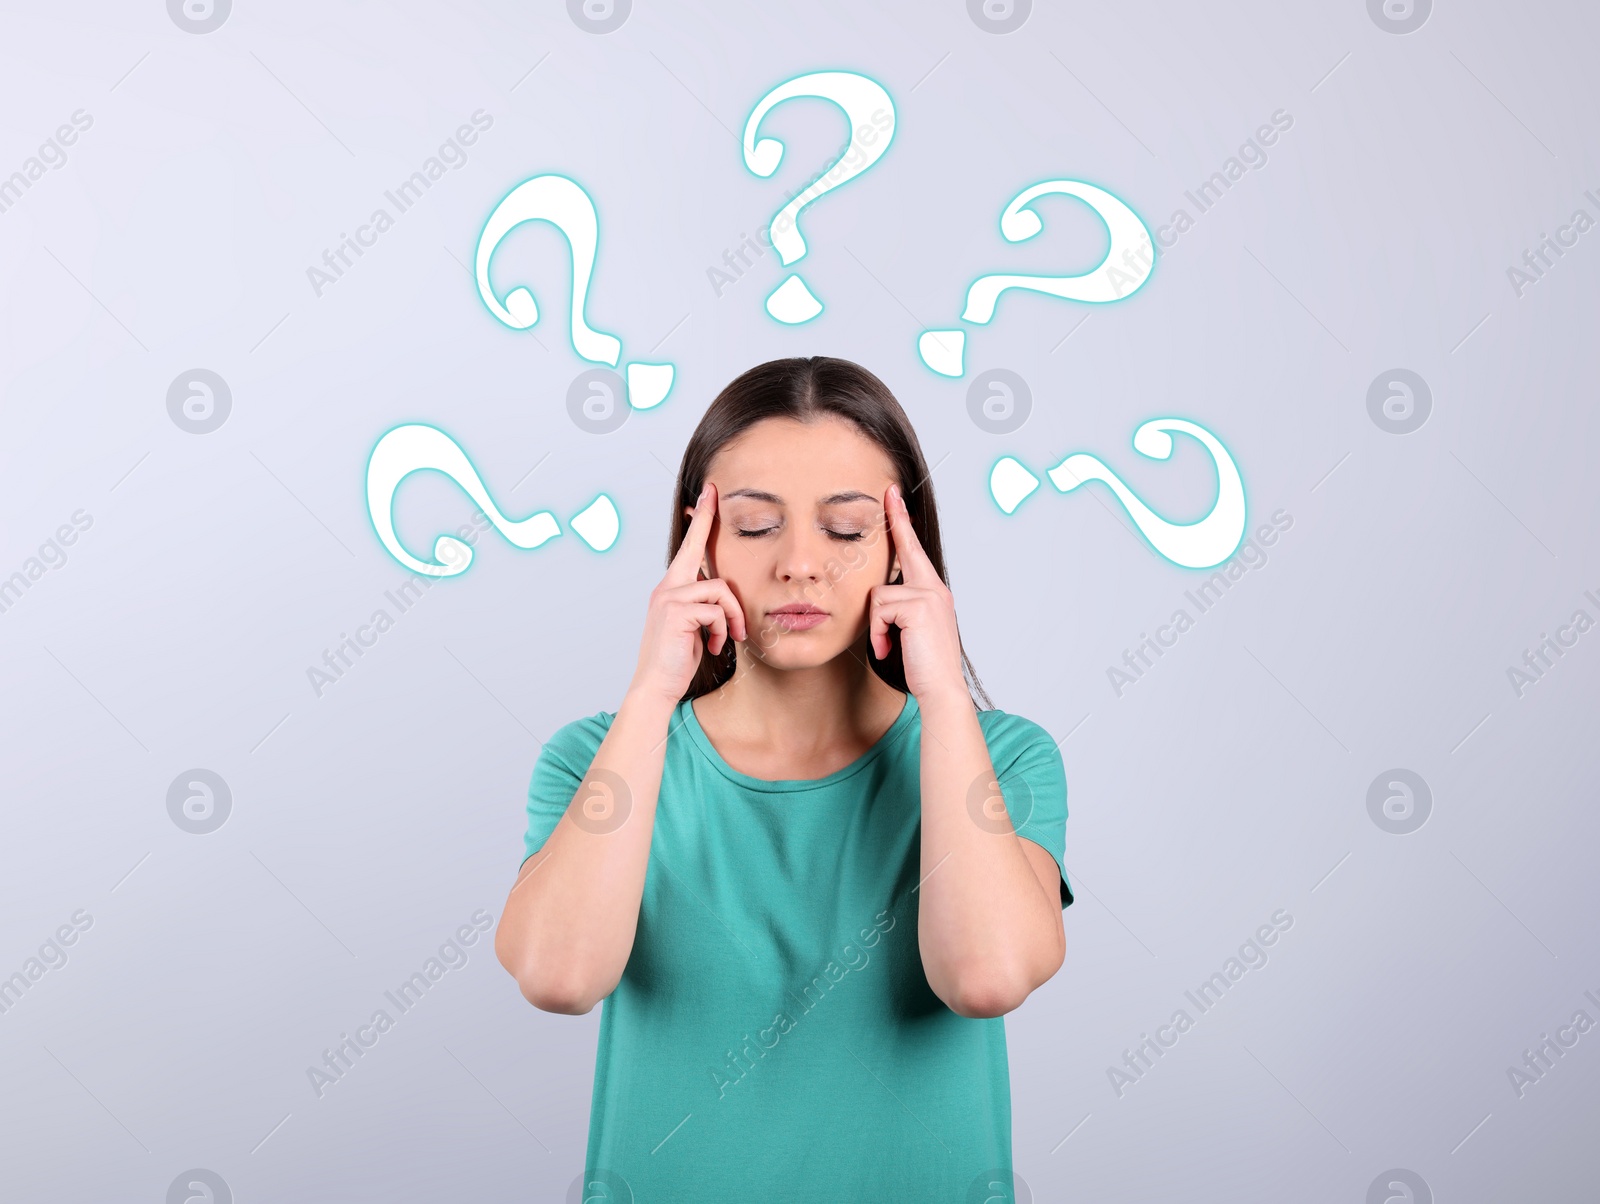 Image of Amnesia concept. Woman surrounded by question marks trying to remember something on light background